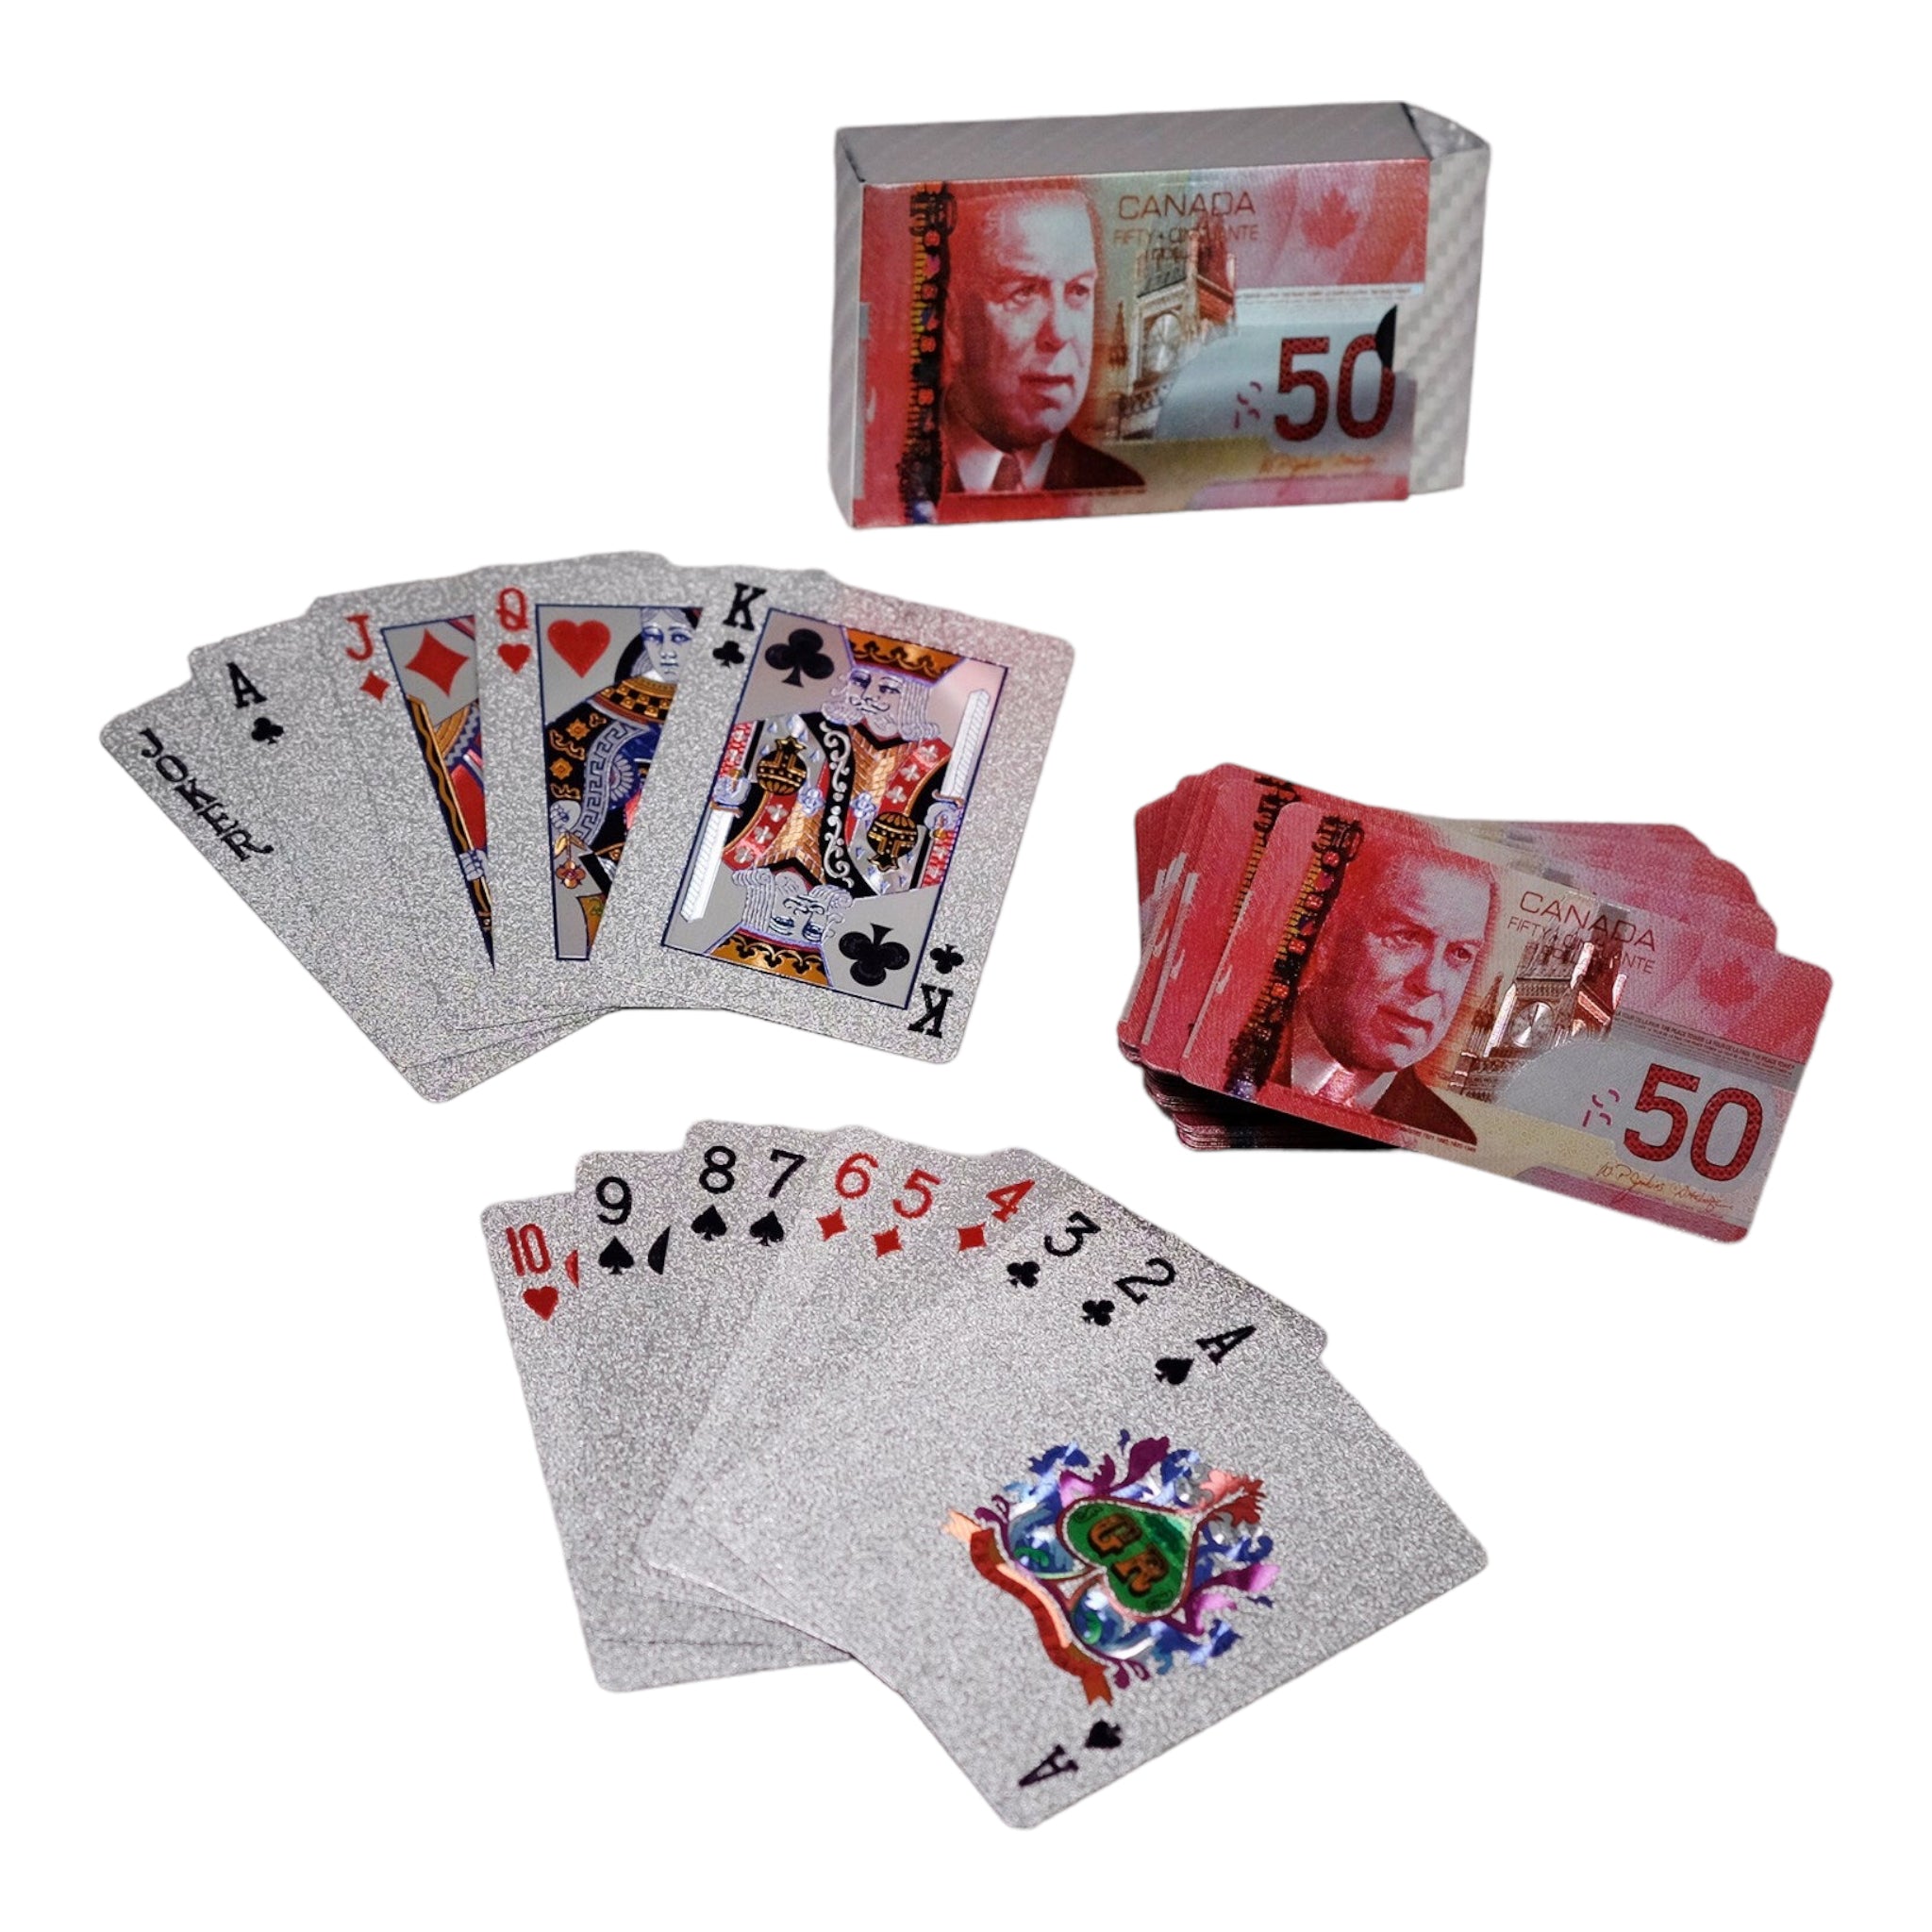 SILVER POKER CARDS - CANADA 50 DOLLARS NOTE PLAYING CARDS